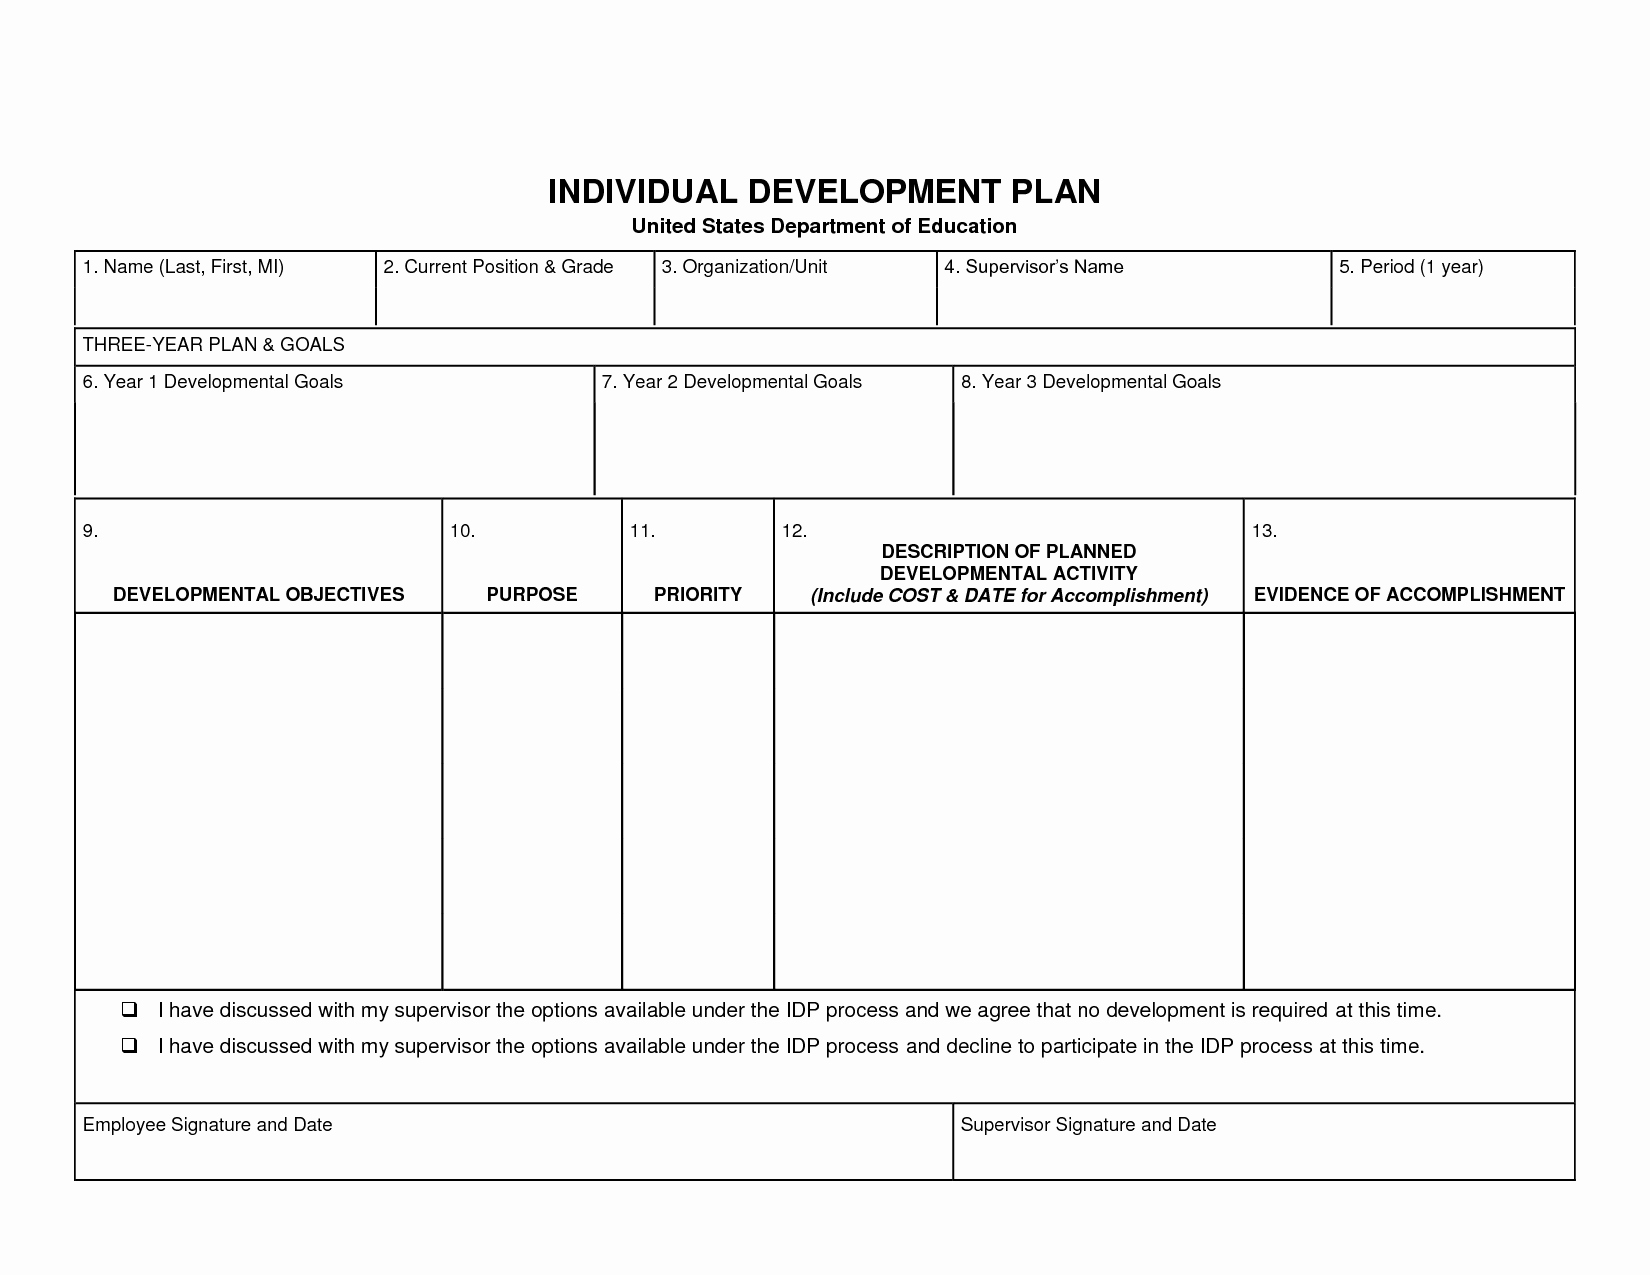 Individual Development Plan Template Excel Inspirational Individual Development Plan Template Word Google Search